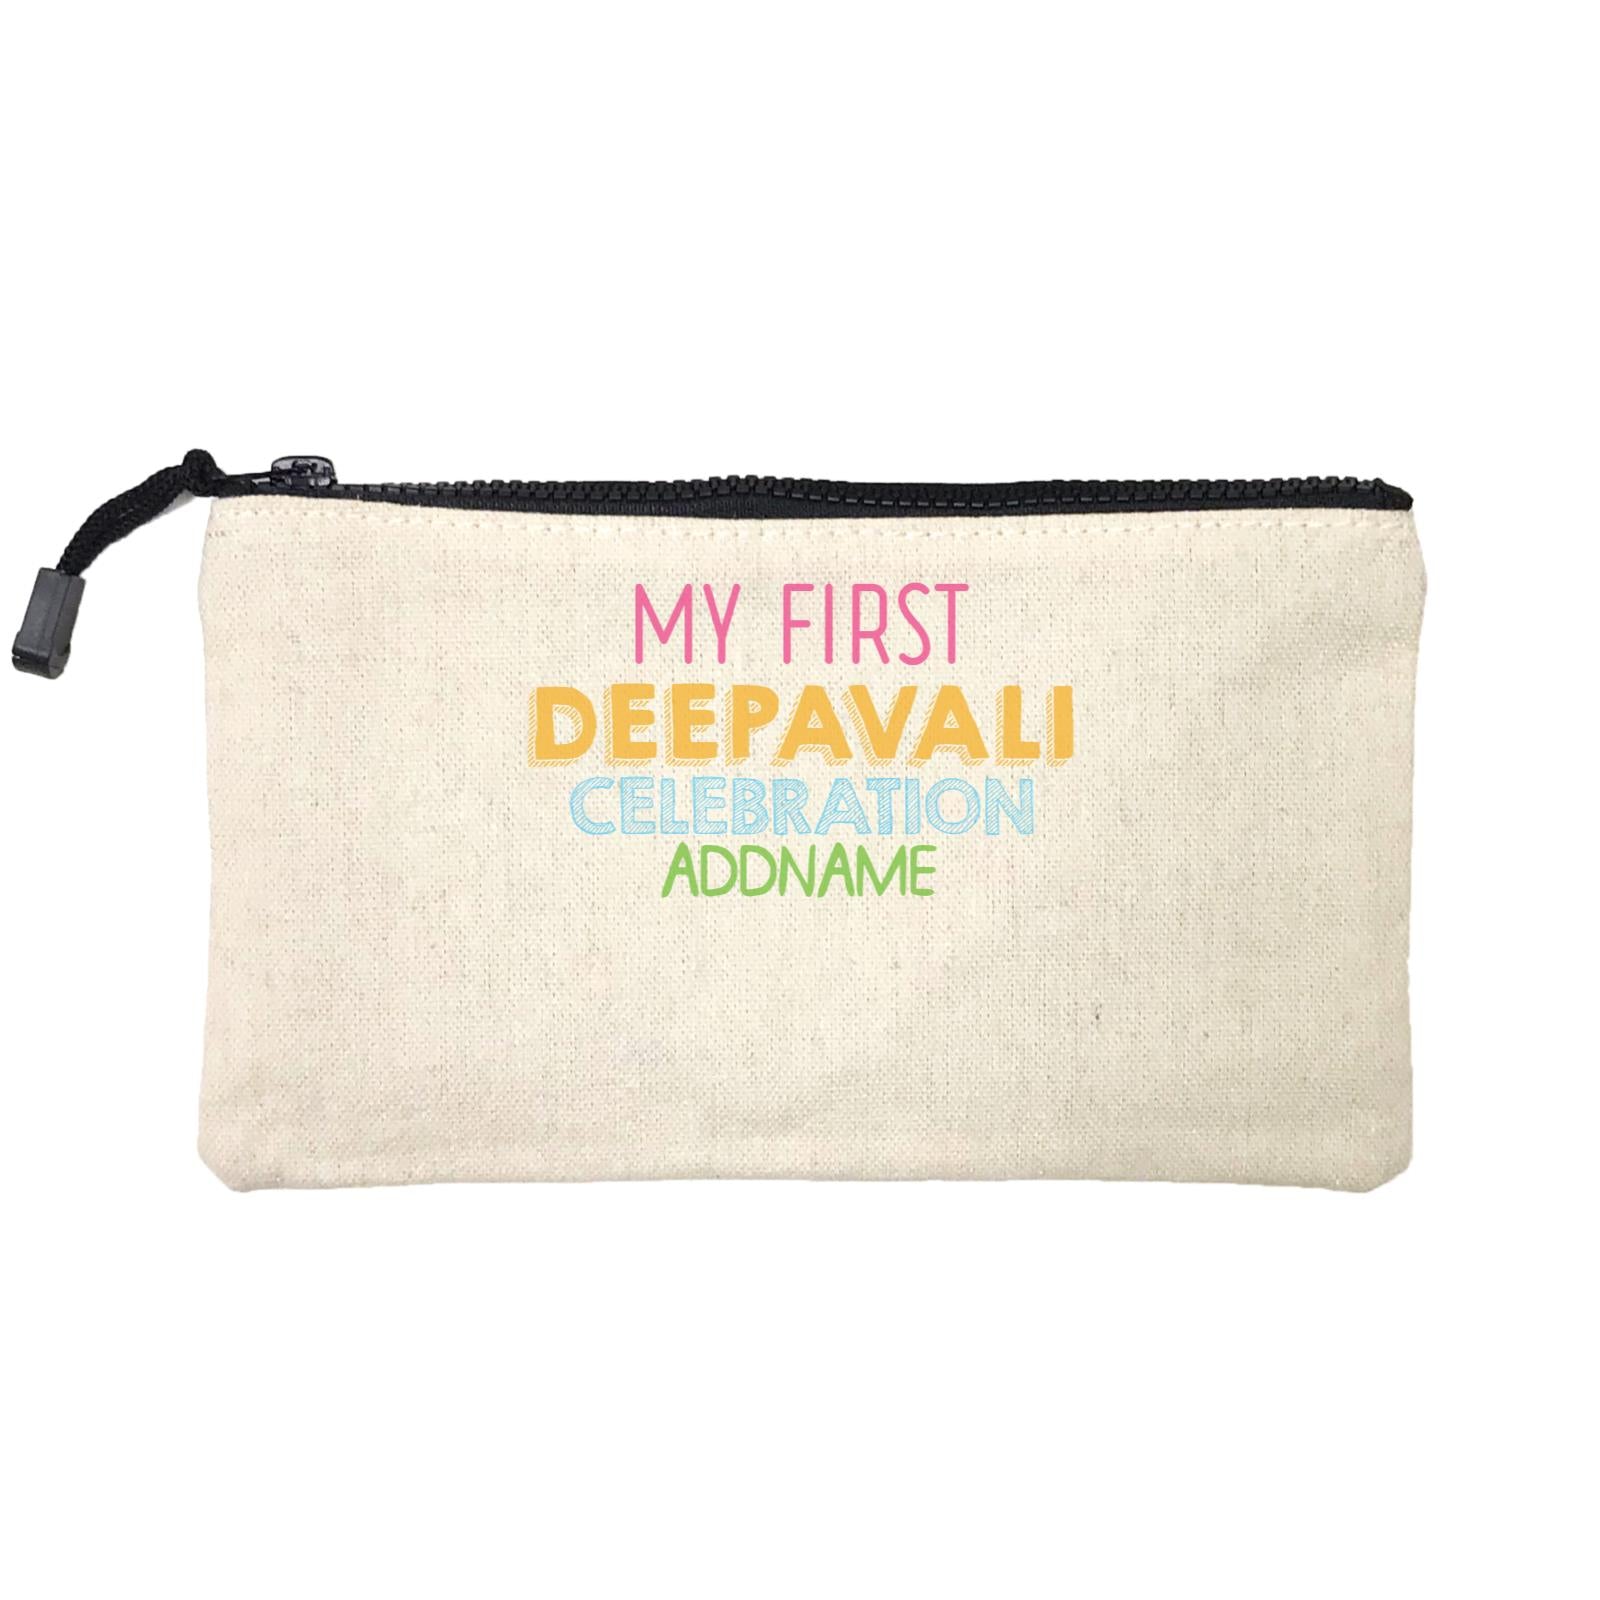 Deepavali Colourful My First Deepavali Celebration Addname Mini Accessories Stationery Pouch